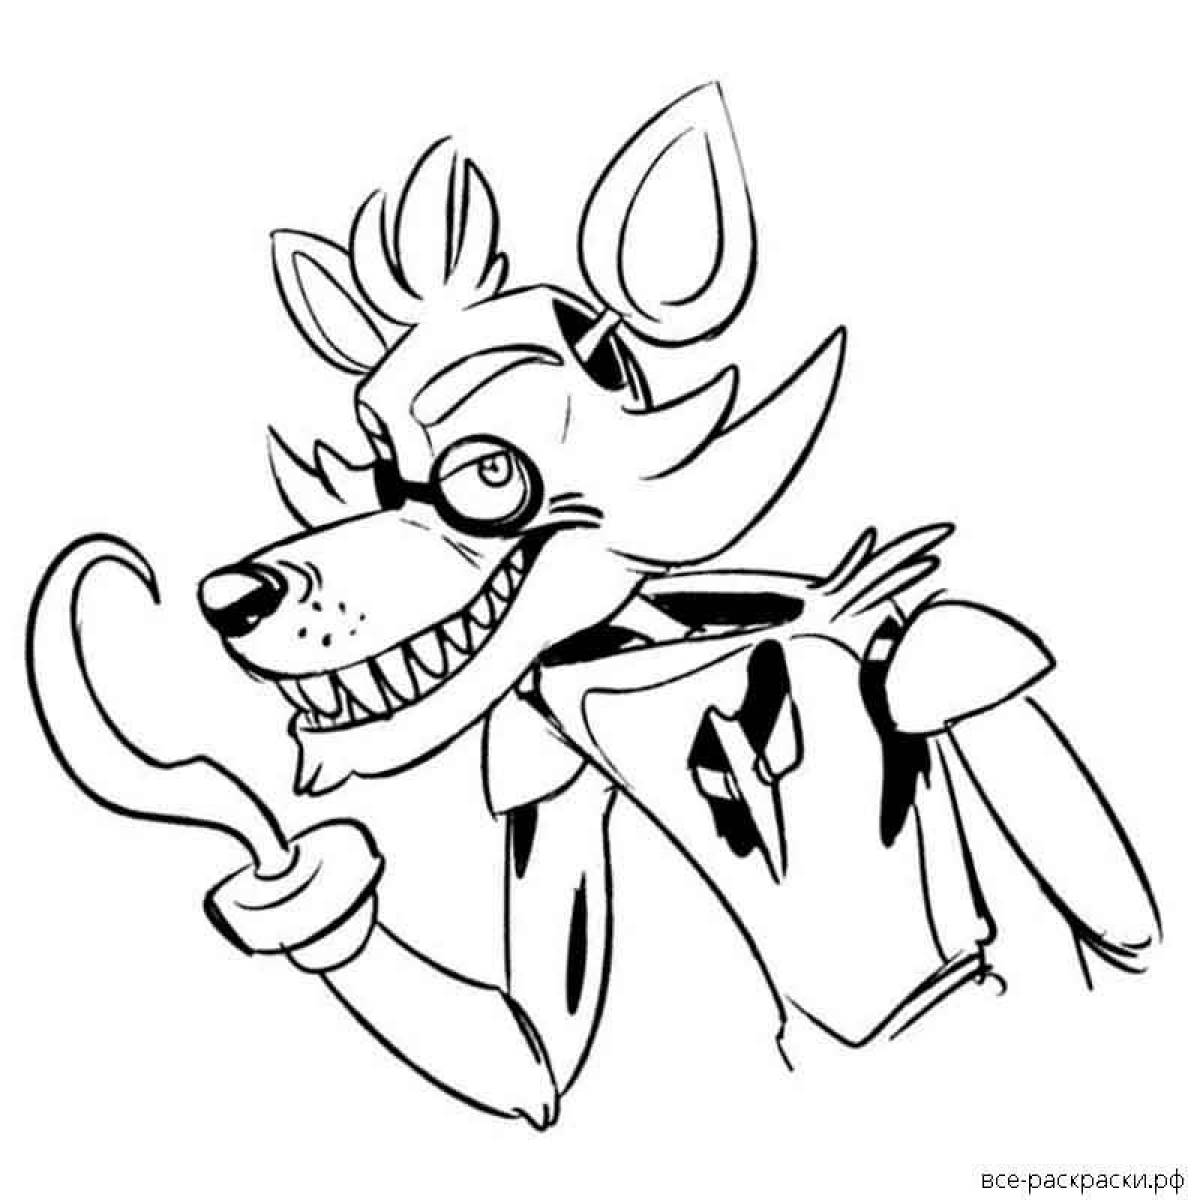 Charming mangle coloring book